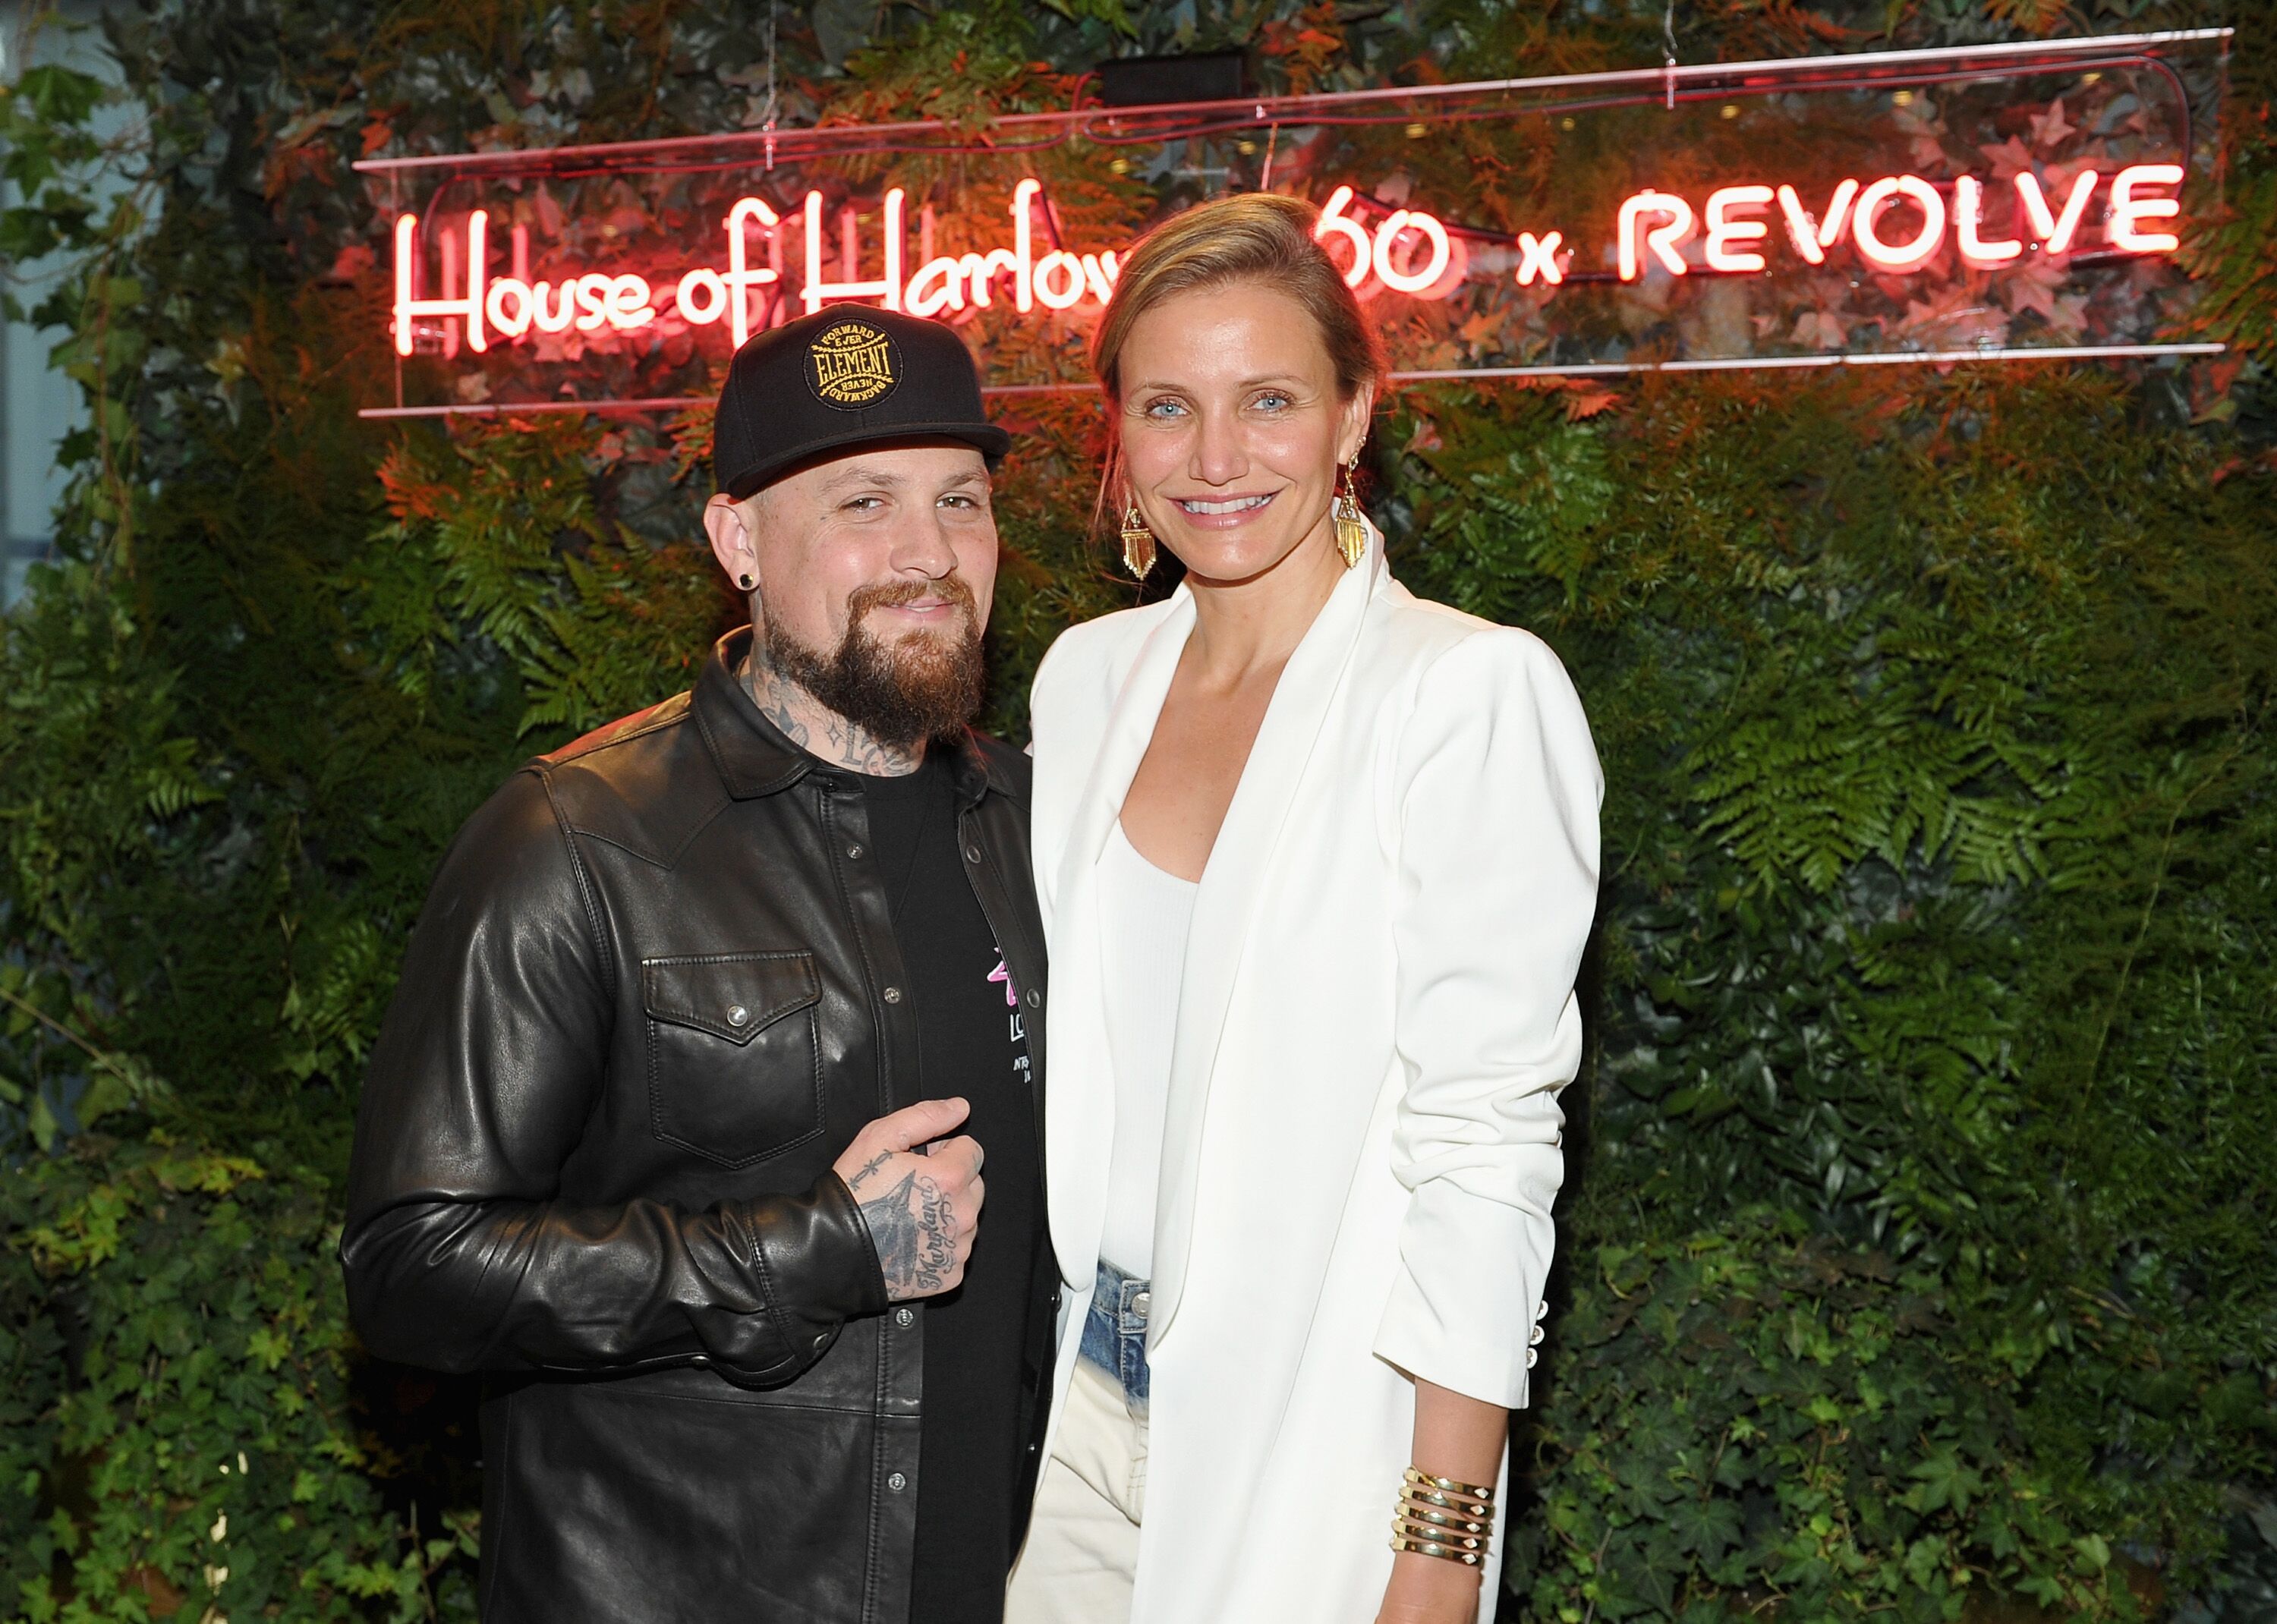 Guitarist Benji Madden and actress Cameron Diaz attend House of Harlow 1960 x REVOLVE on June 2, 2016 in Los Angeles | Source: Getty Images